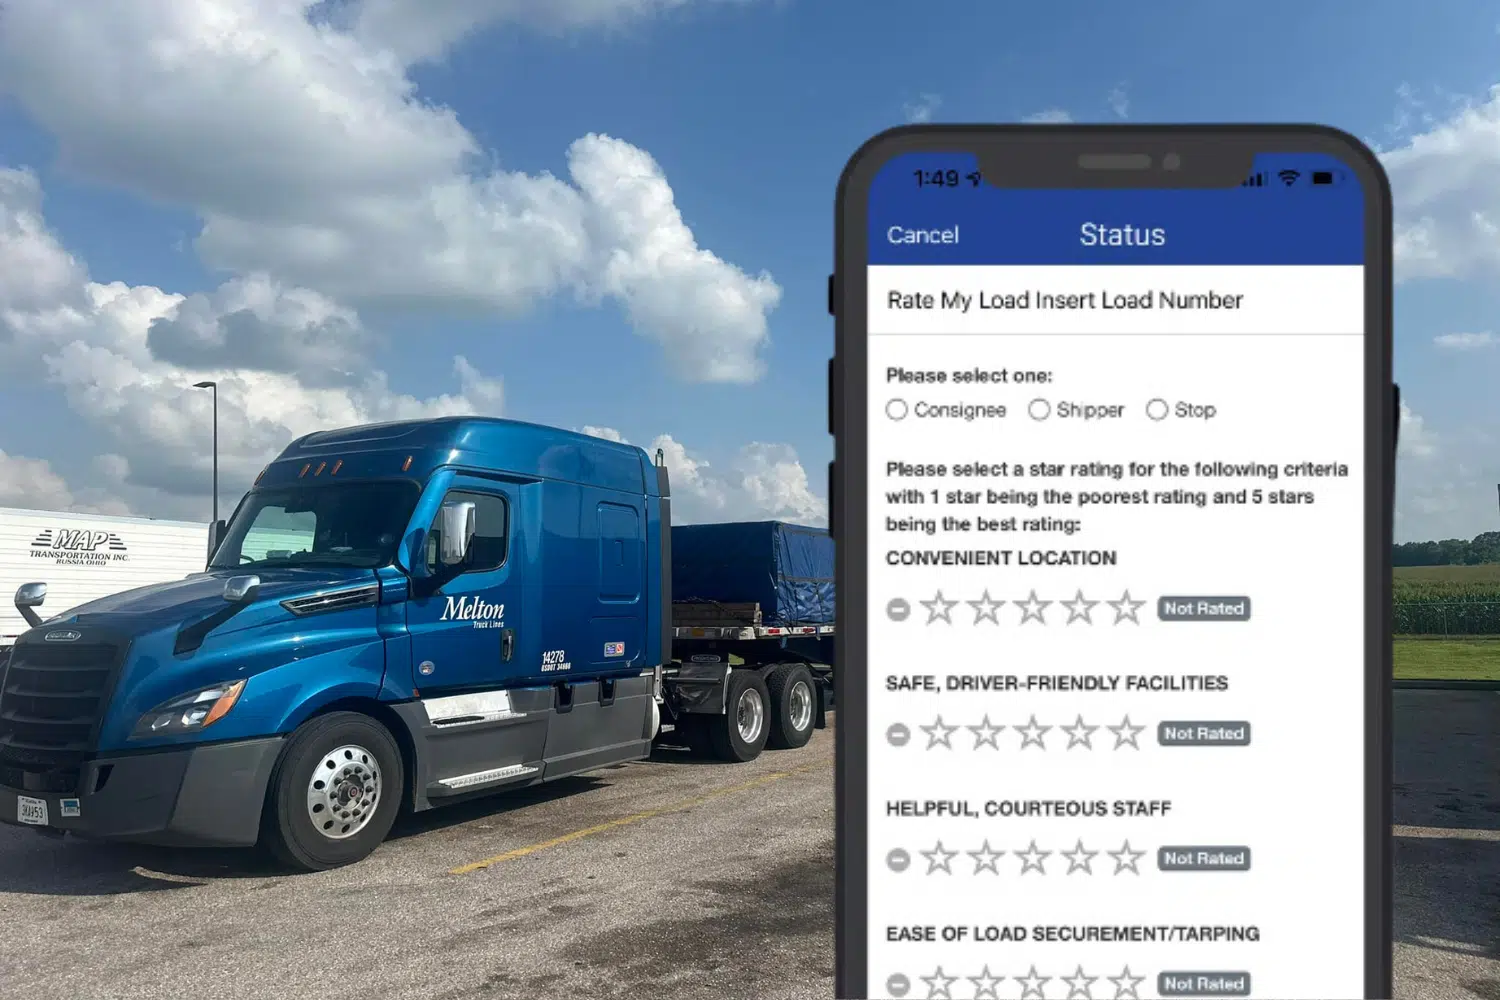 Melton truck with a cell phone with the Rate My Load application